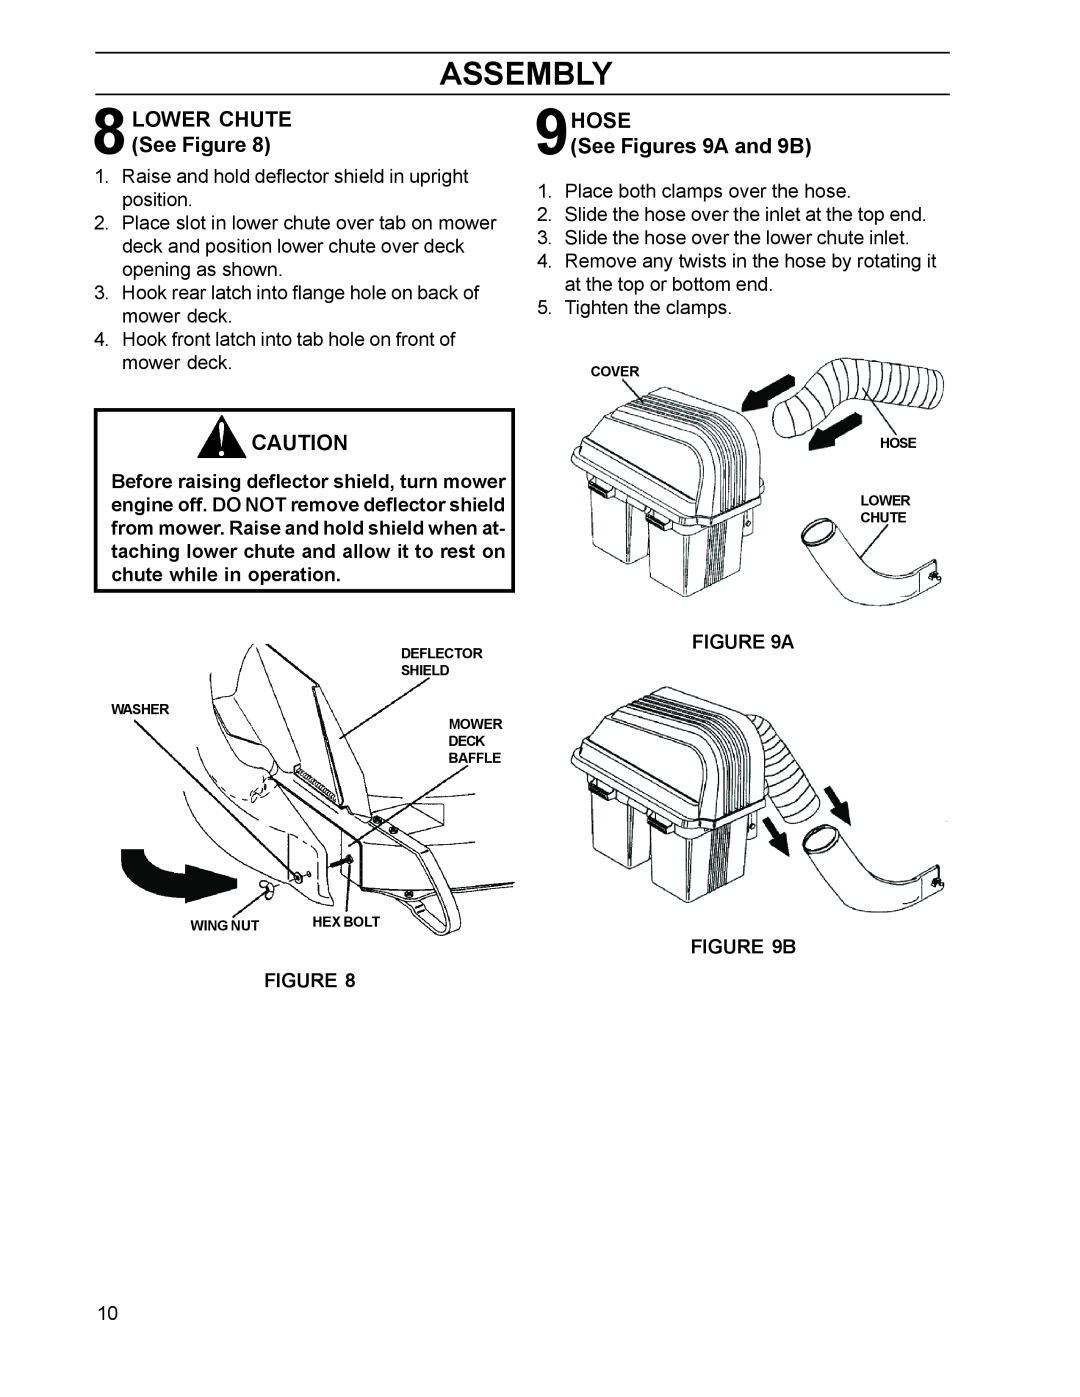 HTC 110163 / CZ38 manual 8LOWER CHUTE See Figure, 9HOSE See Figures 9A and 9B, A B, Assembly 